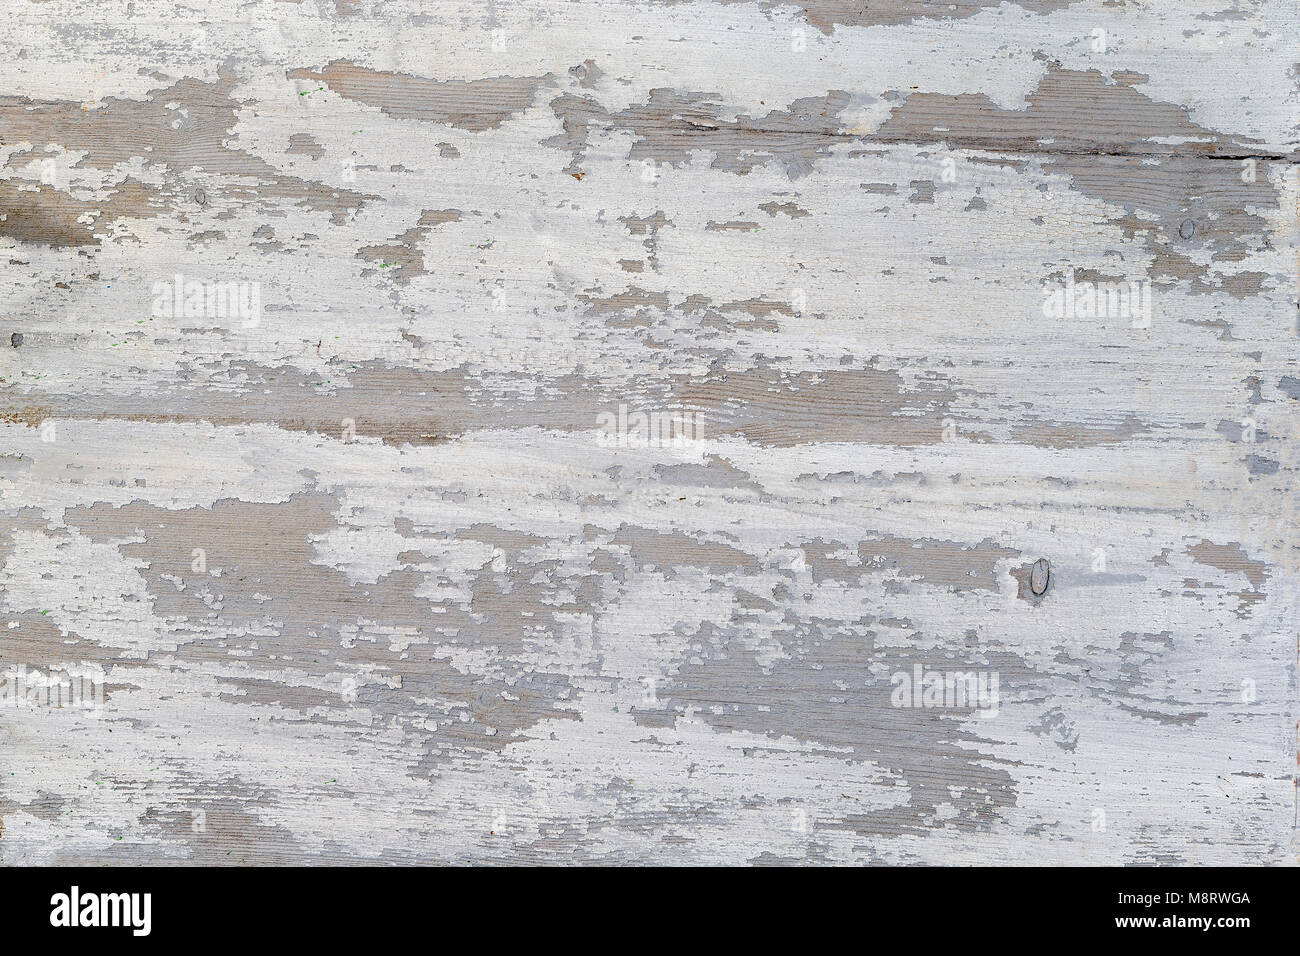 A Weathered wood texture with peeling white paint. Abstract grunge background. Stock Photo